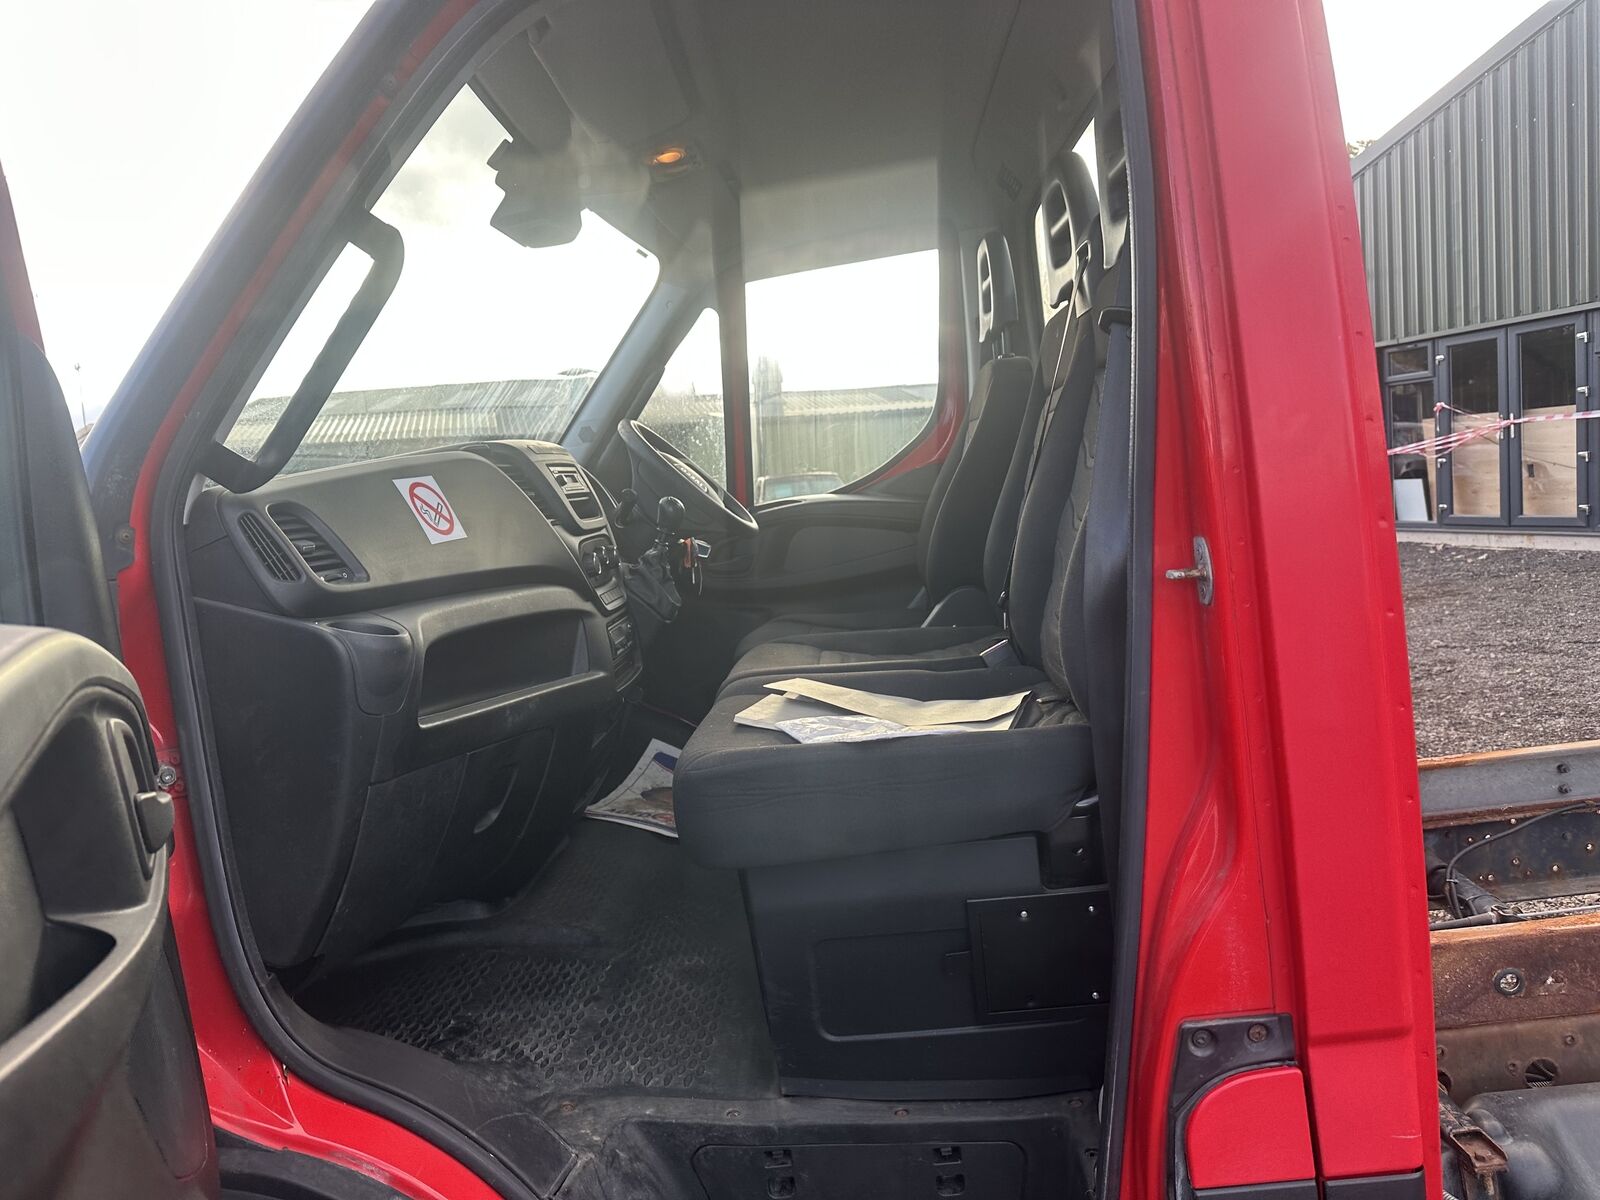 Bid on ULTIMATE RECOVERY BEAST: 2016 IVECO DAILY 70C17 CHASSIS CAB - NO VAT ON HAMMER- Buy &amp; Sell on Auction with EAMA Group